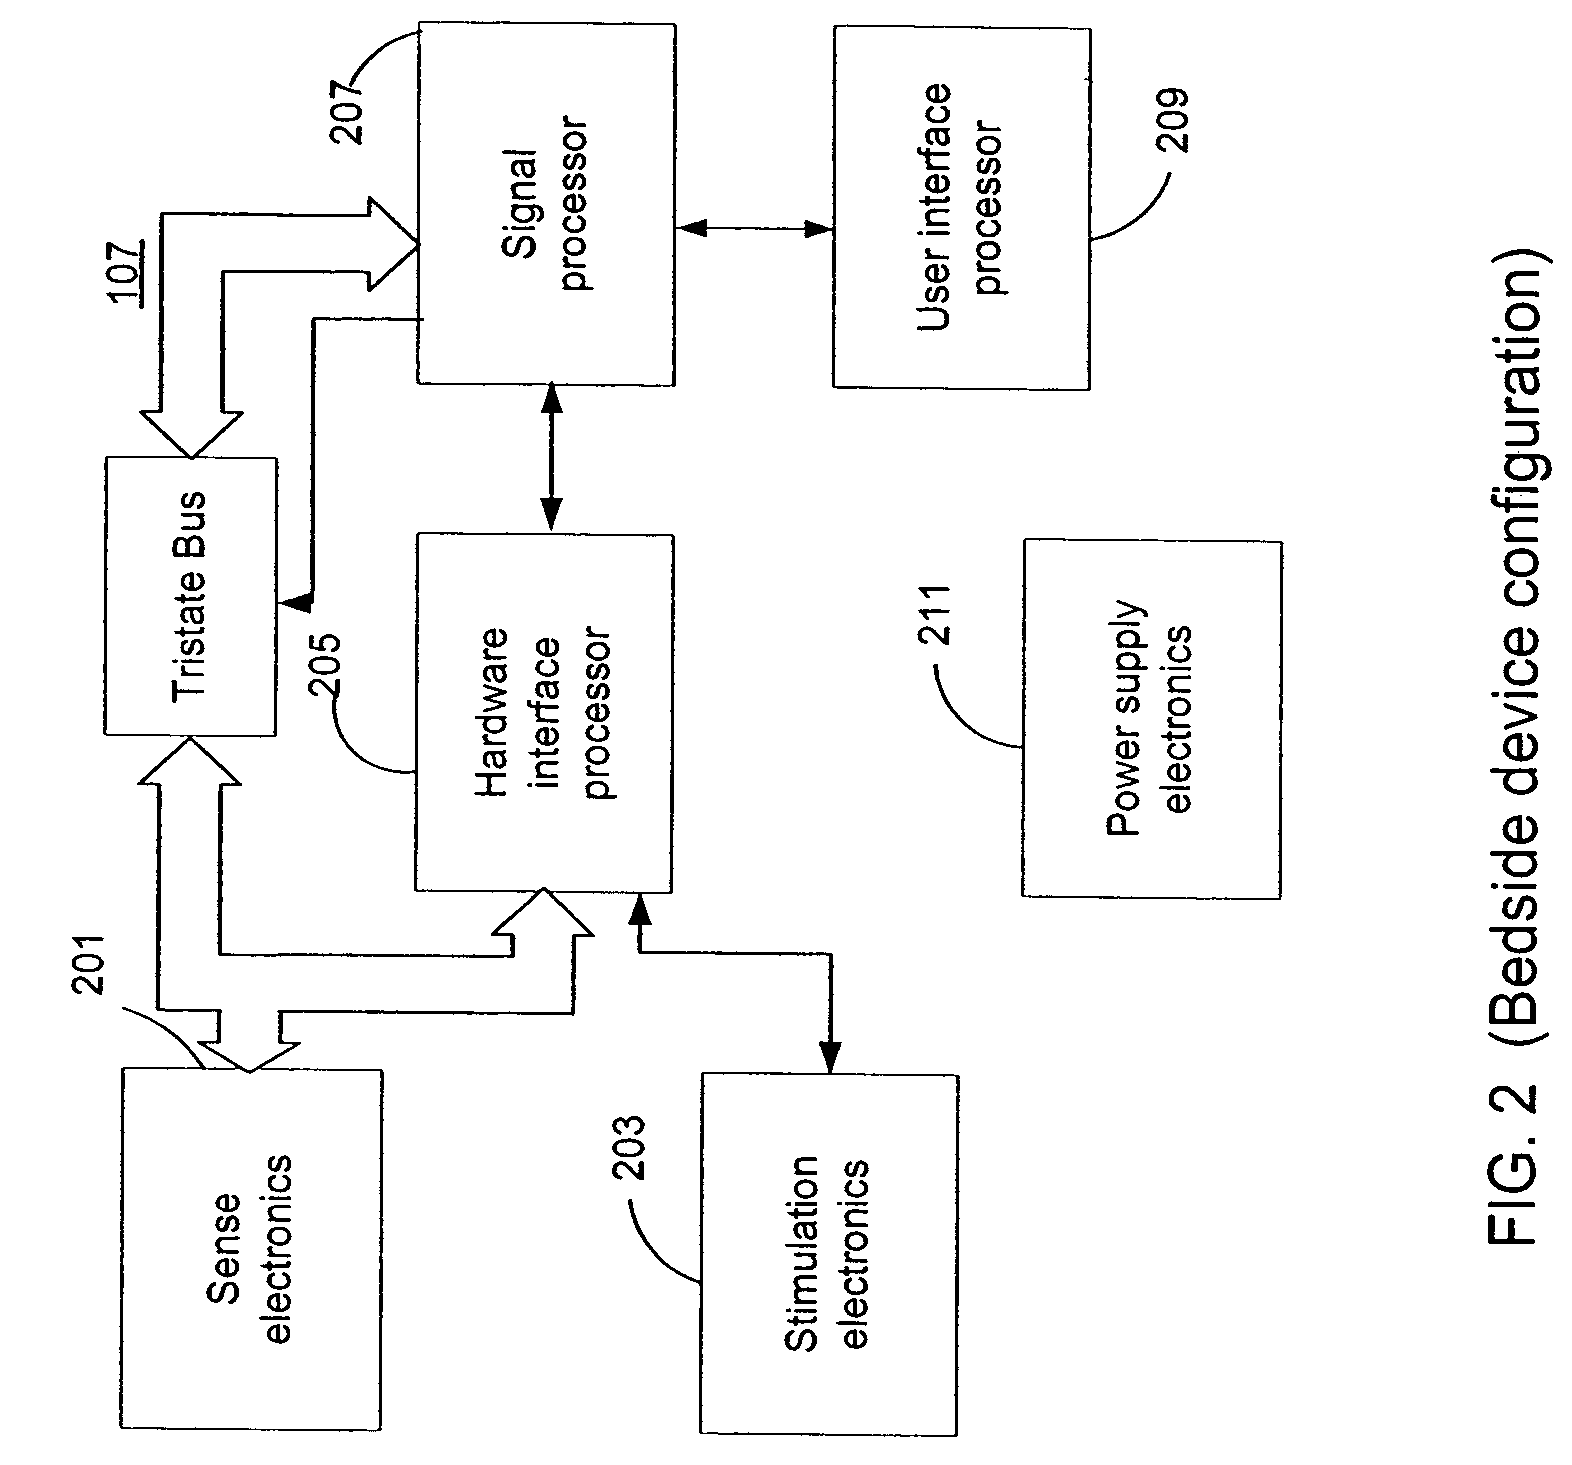 Control of treatment therapy during start-up and during operation of a medical device system